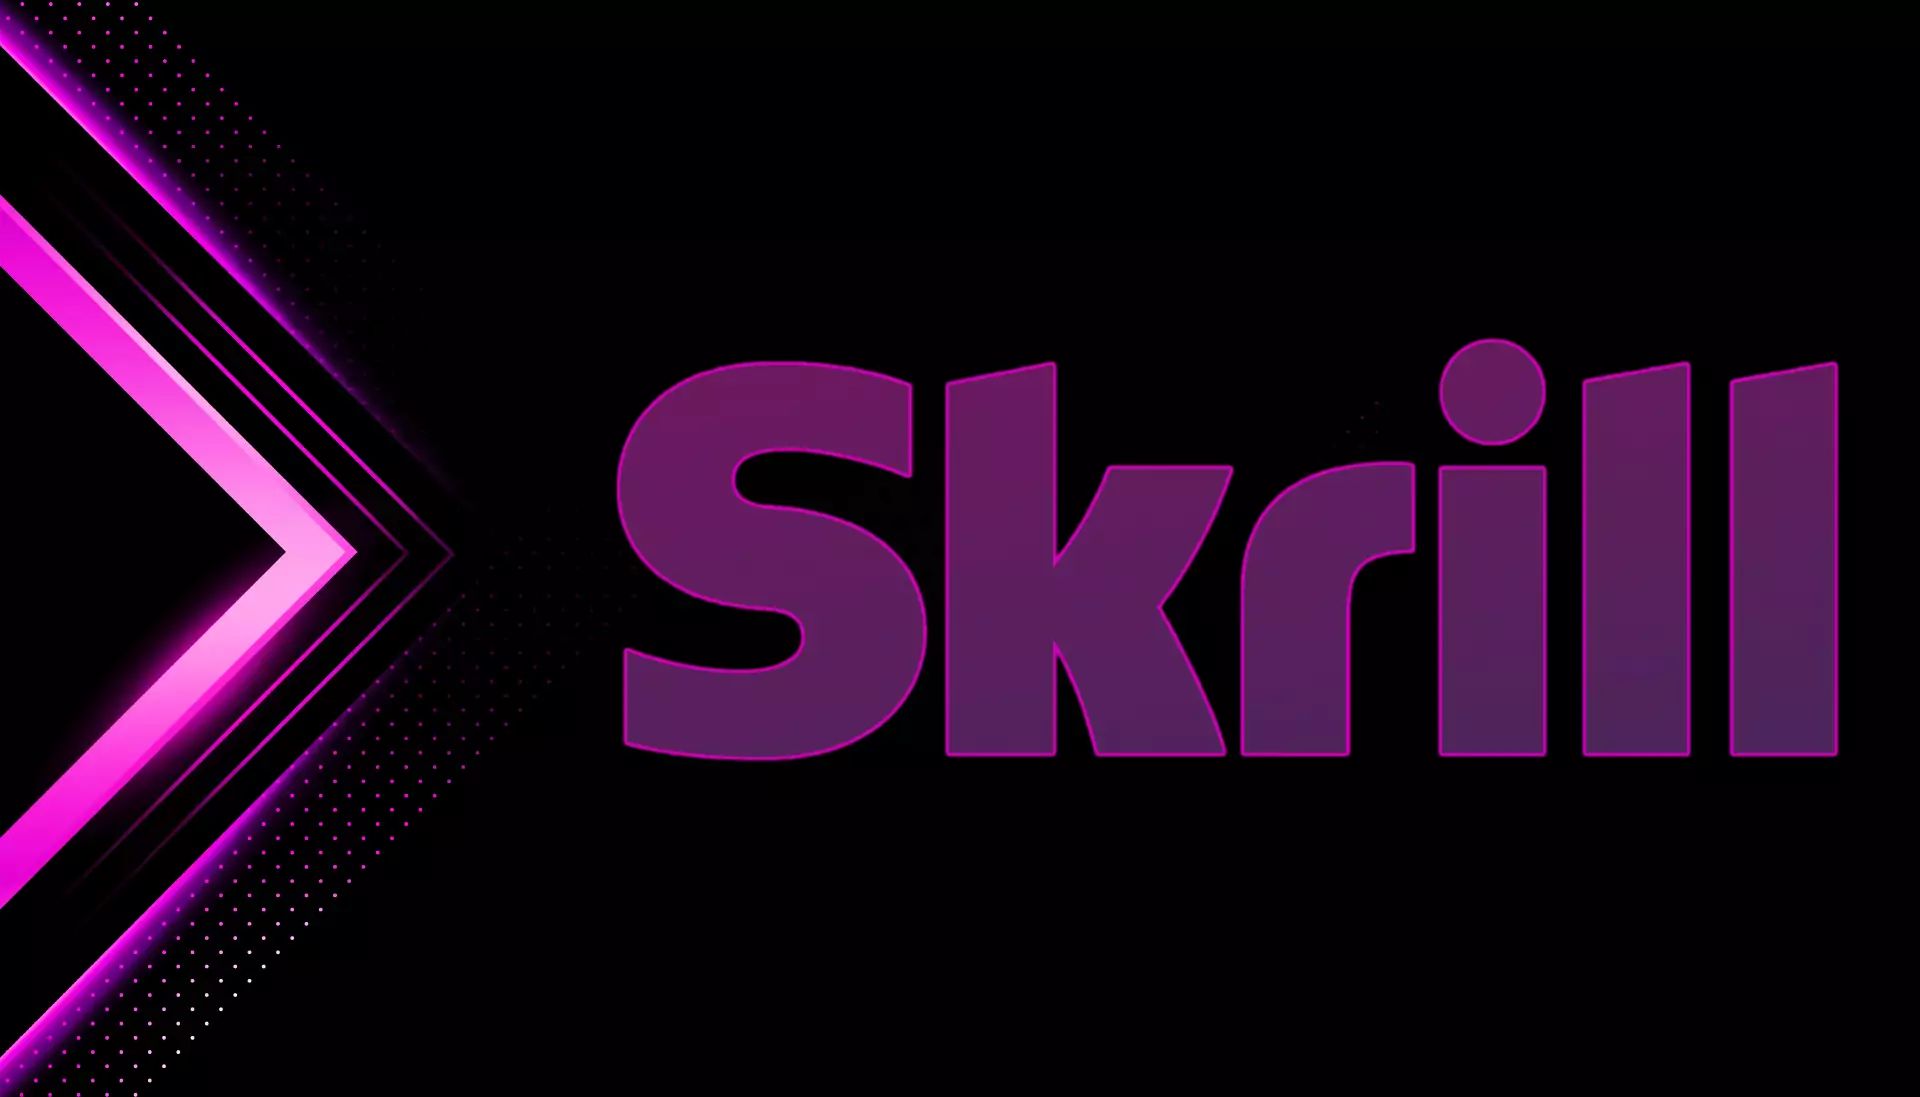 You need to have only an email to open a Skrill e-wallet.